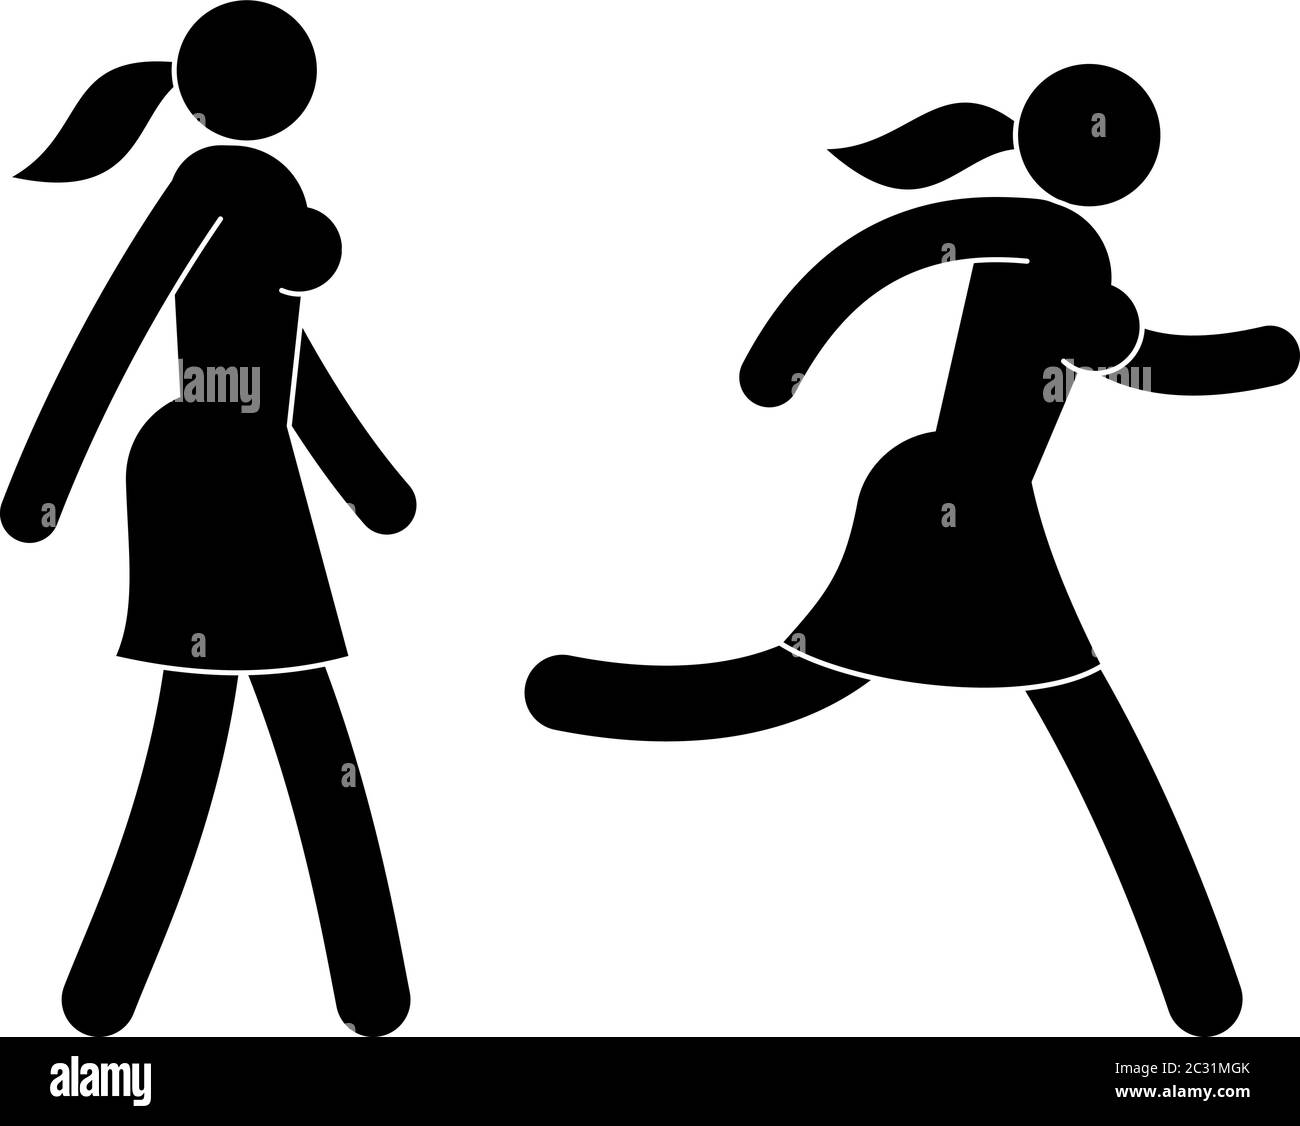 Pictograms, icons of running Stock Vector